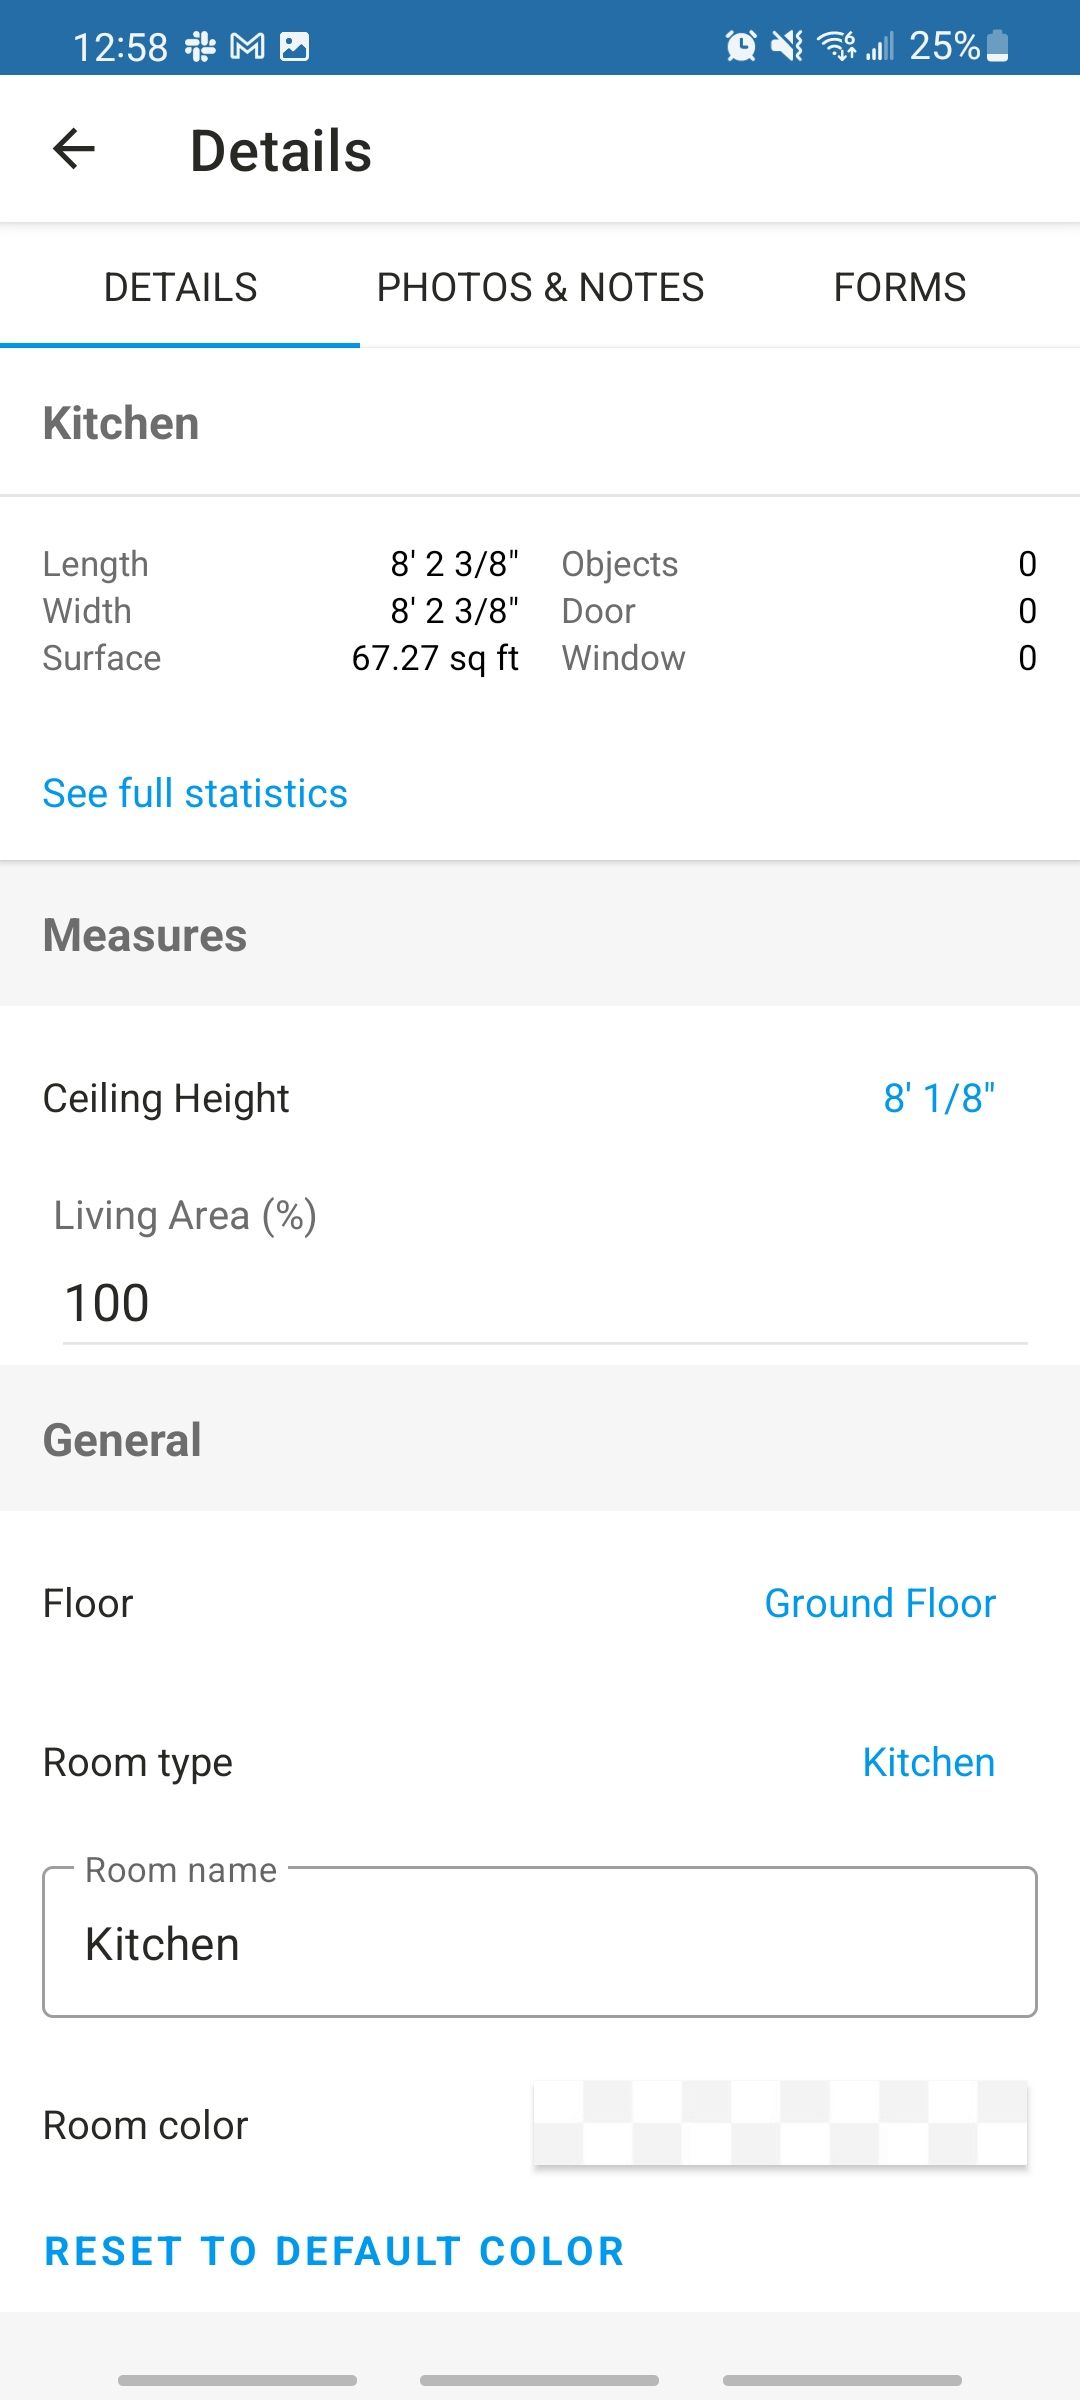 magicplan app details of a project, including room dimensions and ceiling height